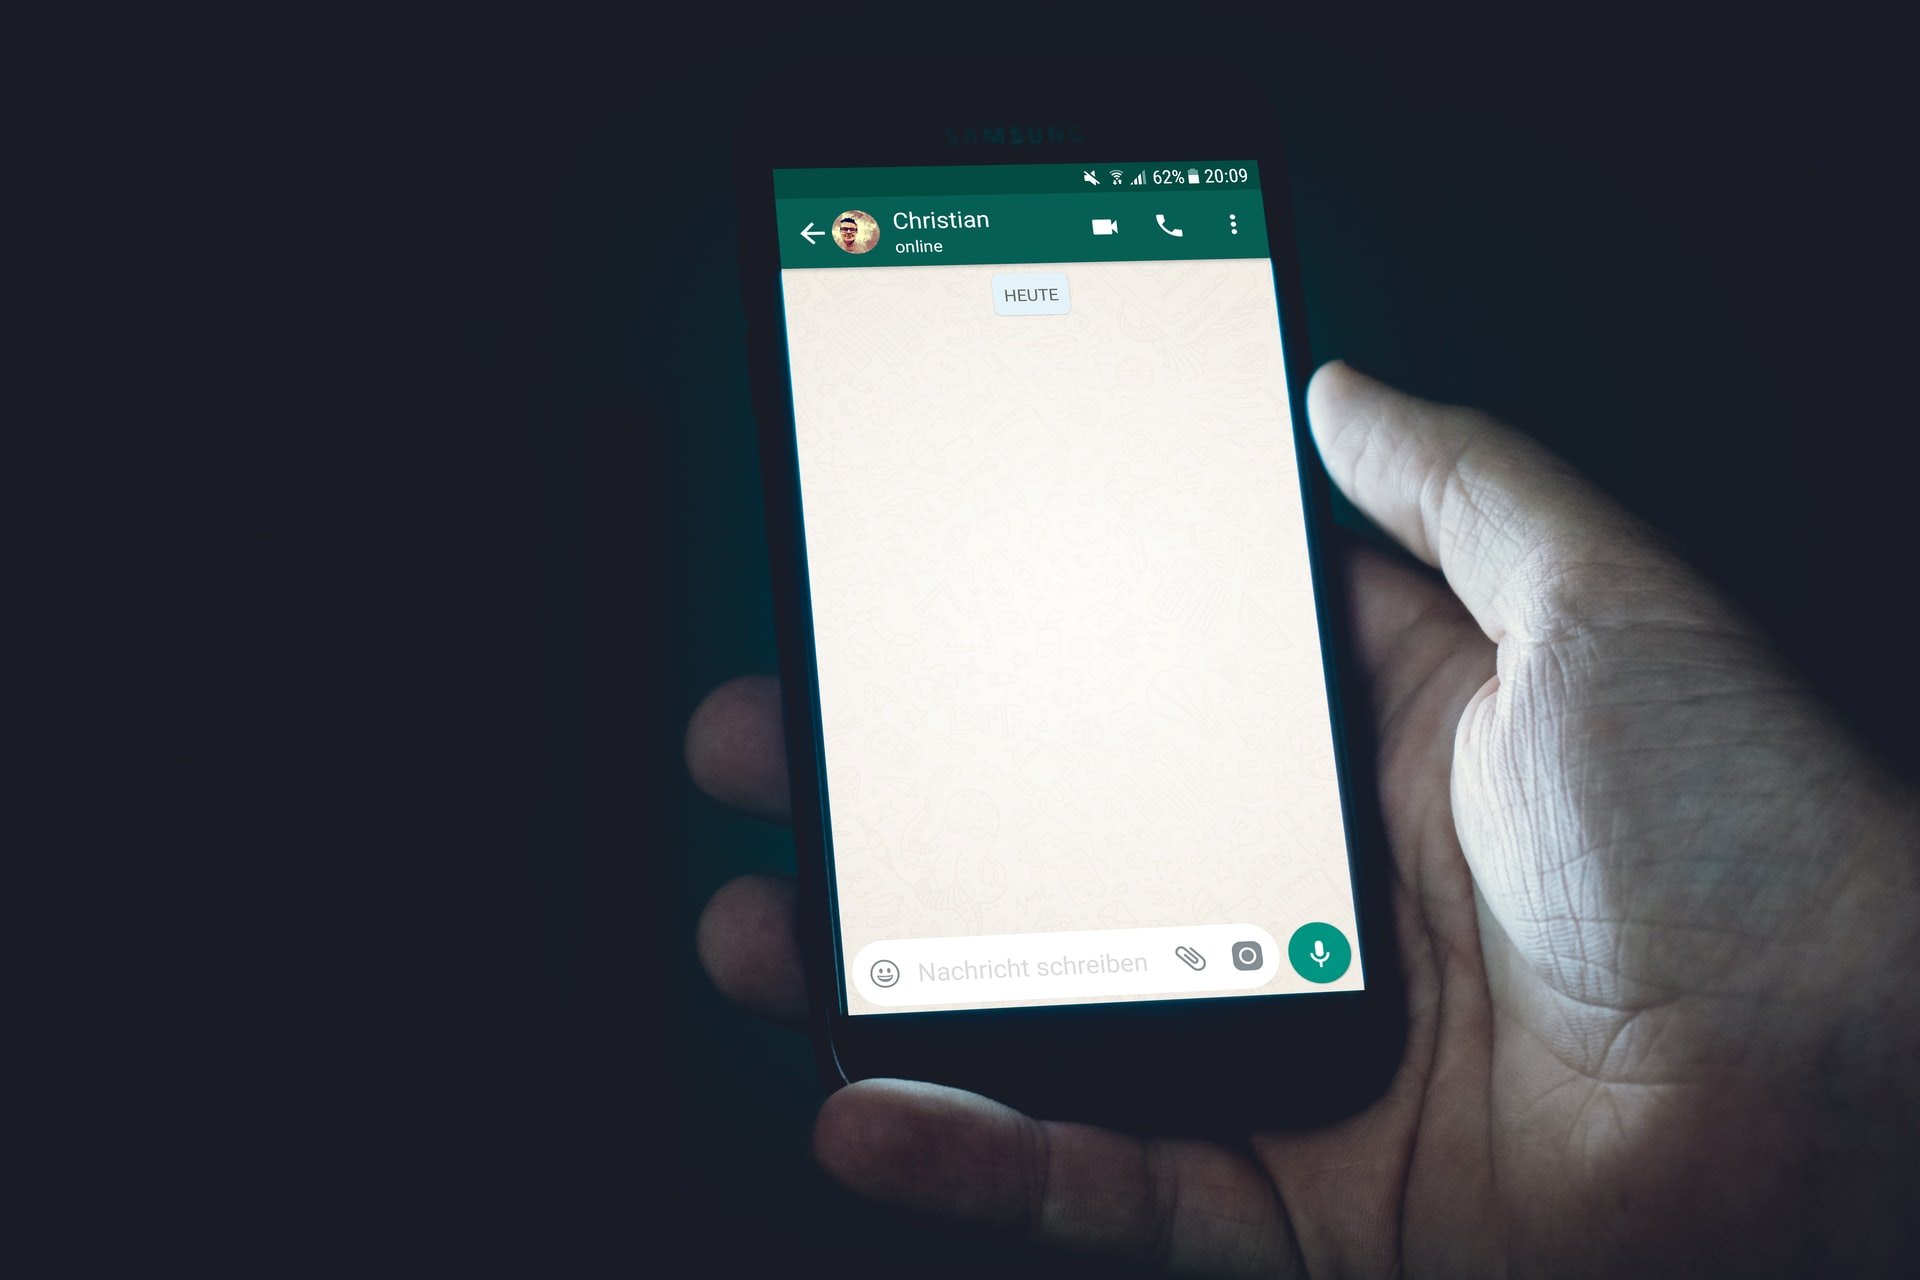 WhatsApp: Check Out the New Feature That Allows Users to Silence Videos Before Sharing